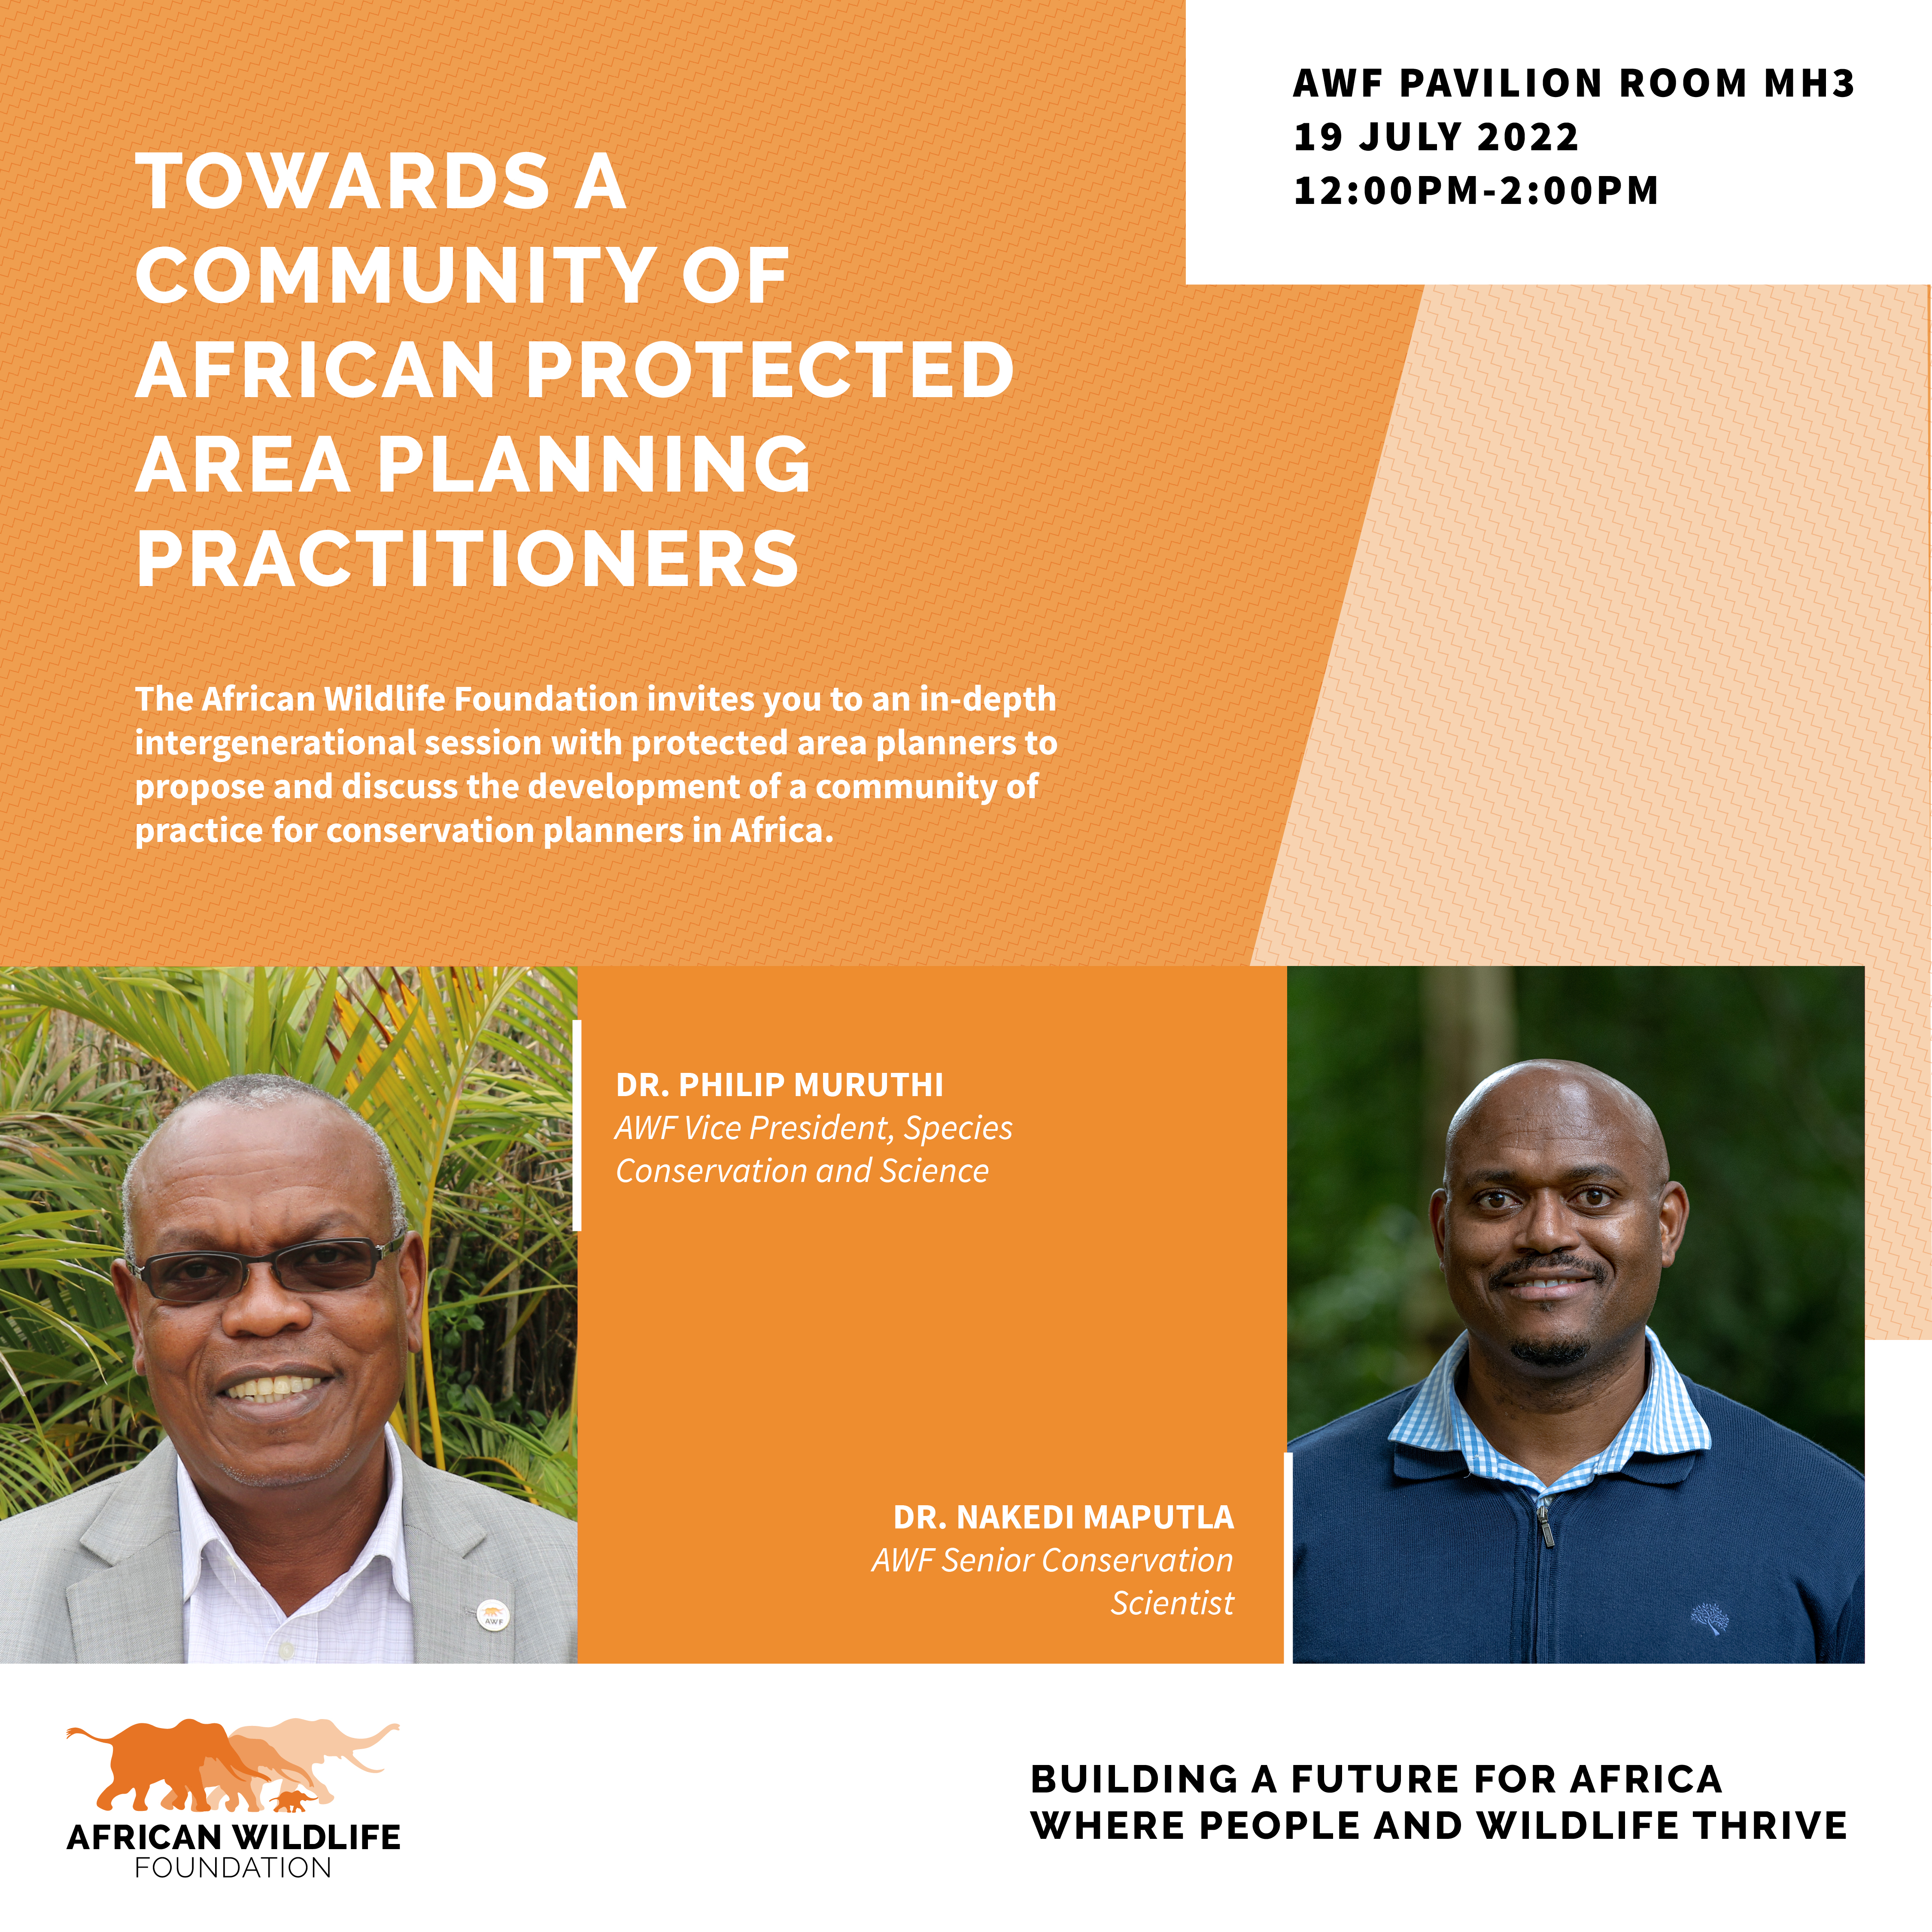 Towards a Community of African Protected Area Planning Practitioners